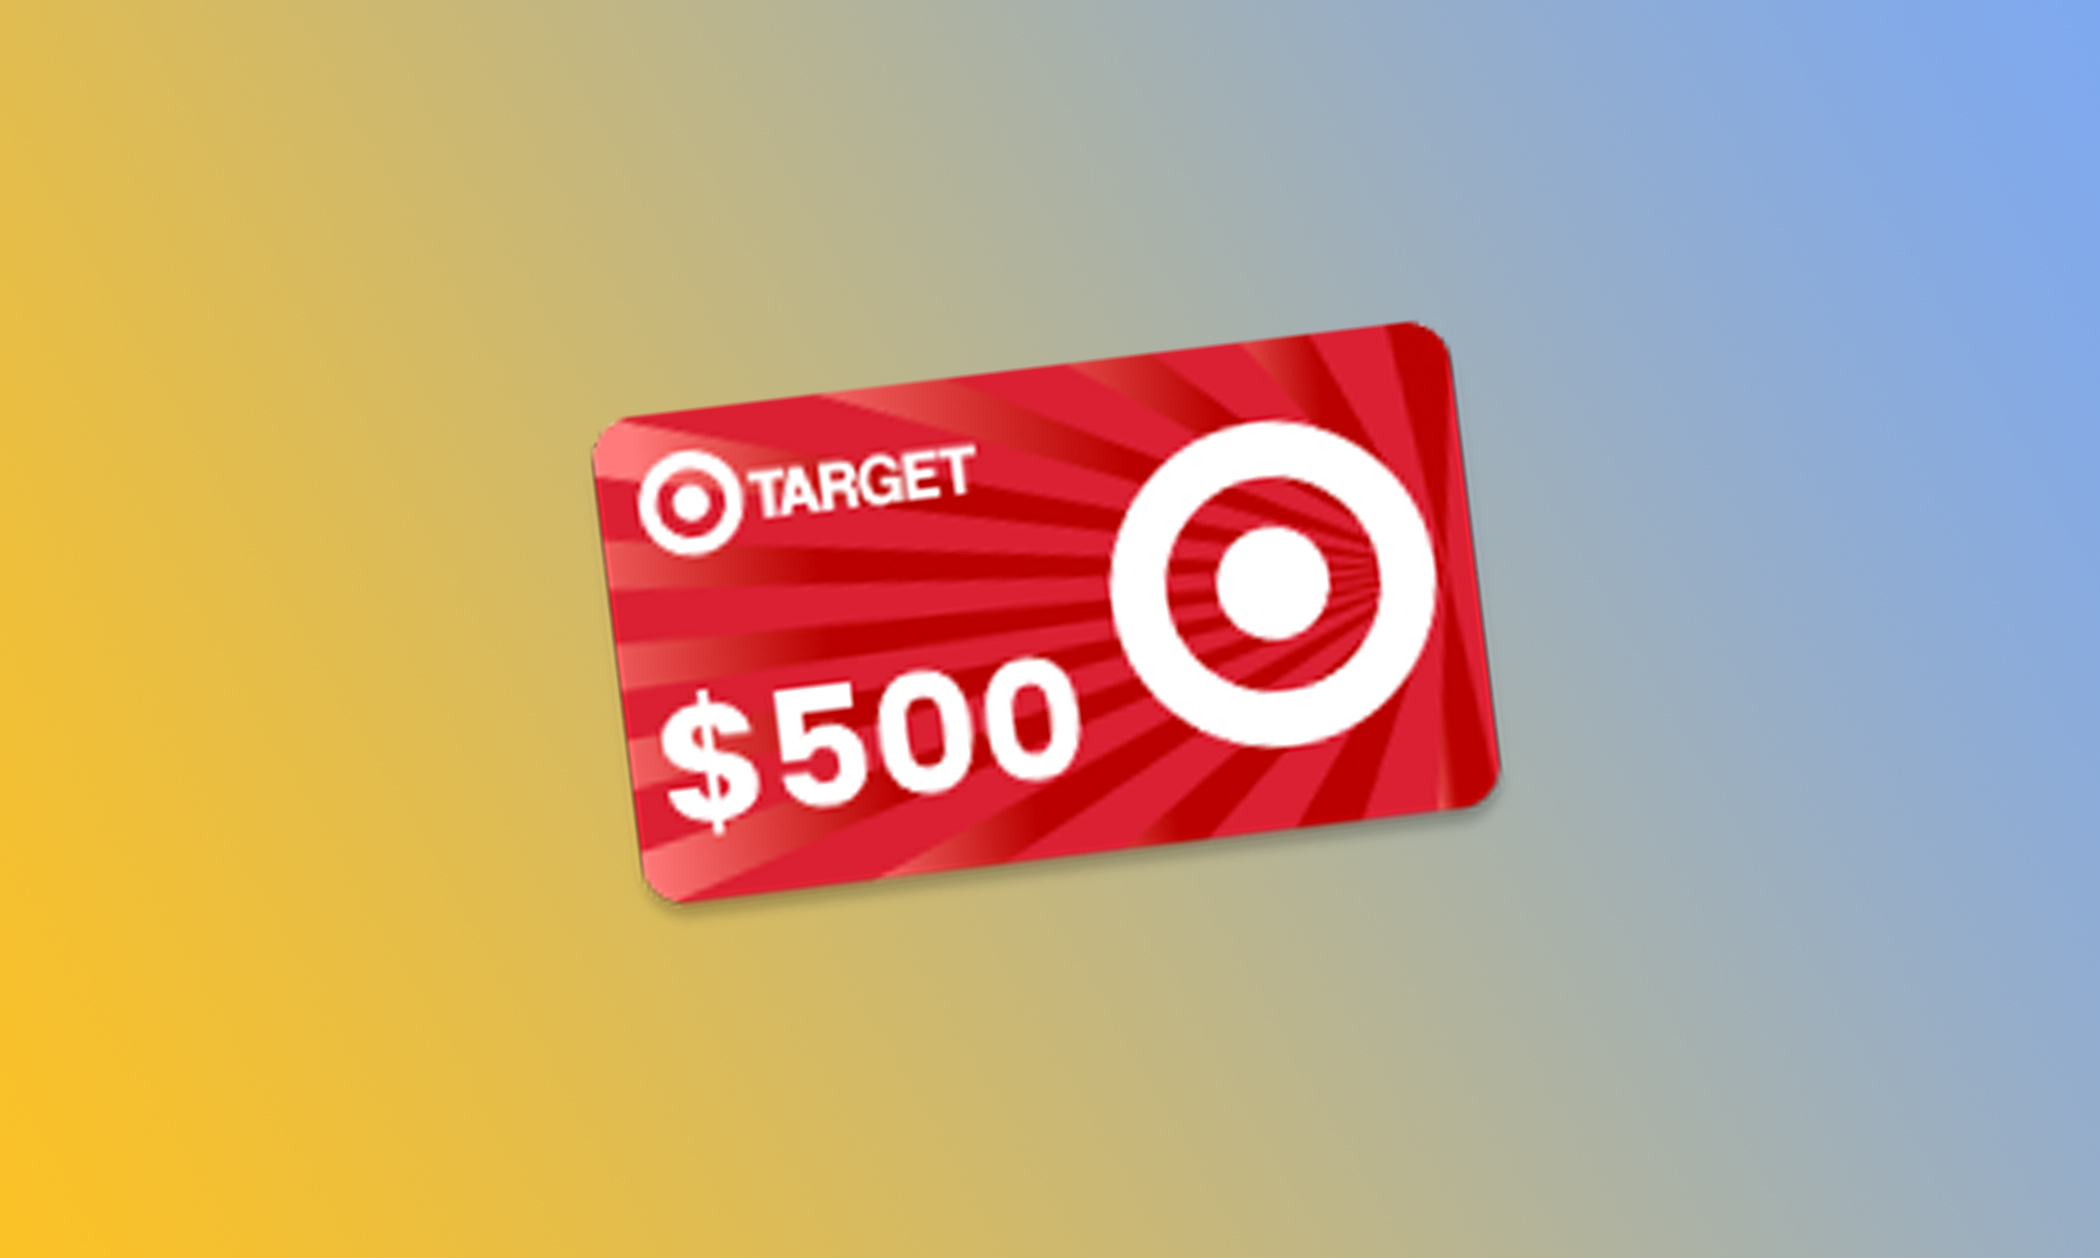 Enter to Win a 500 Target Gift Card! OKWow Sweepstakes and Giveaways